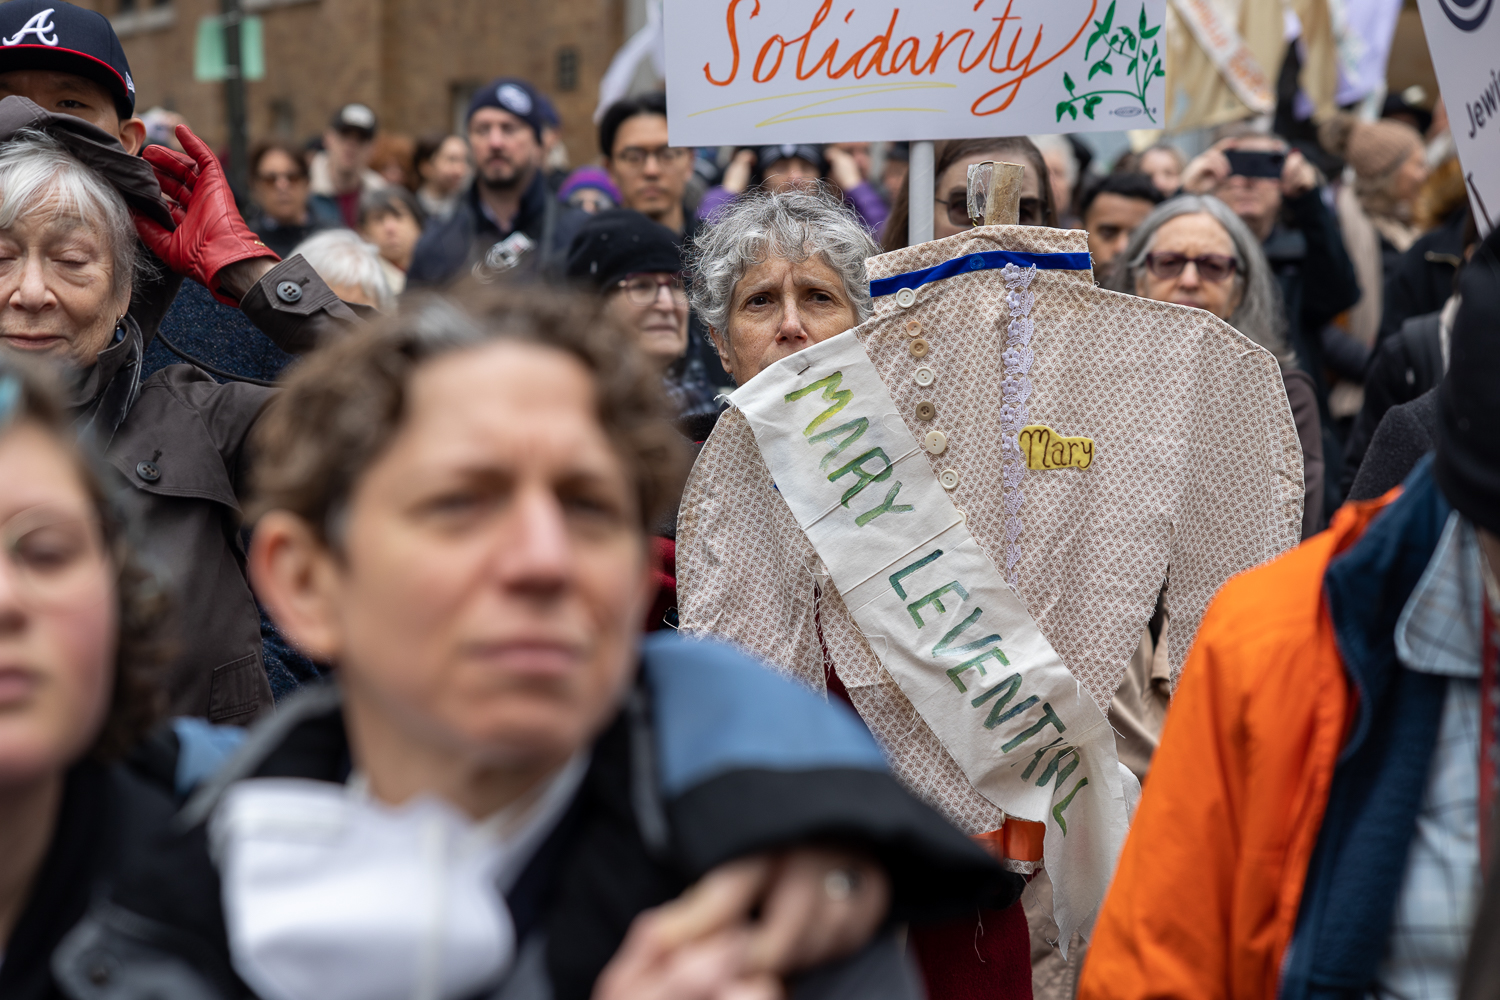 Labor+leaders%2C+politicians+mark+anniversary+of+Triangle+Shirtwaist+Factory+Fire